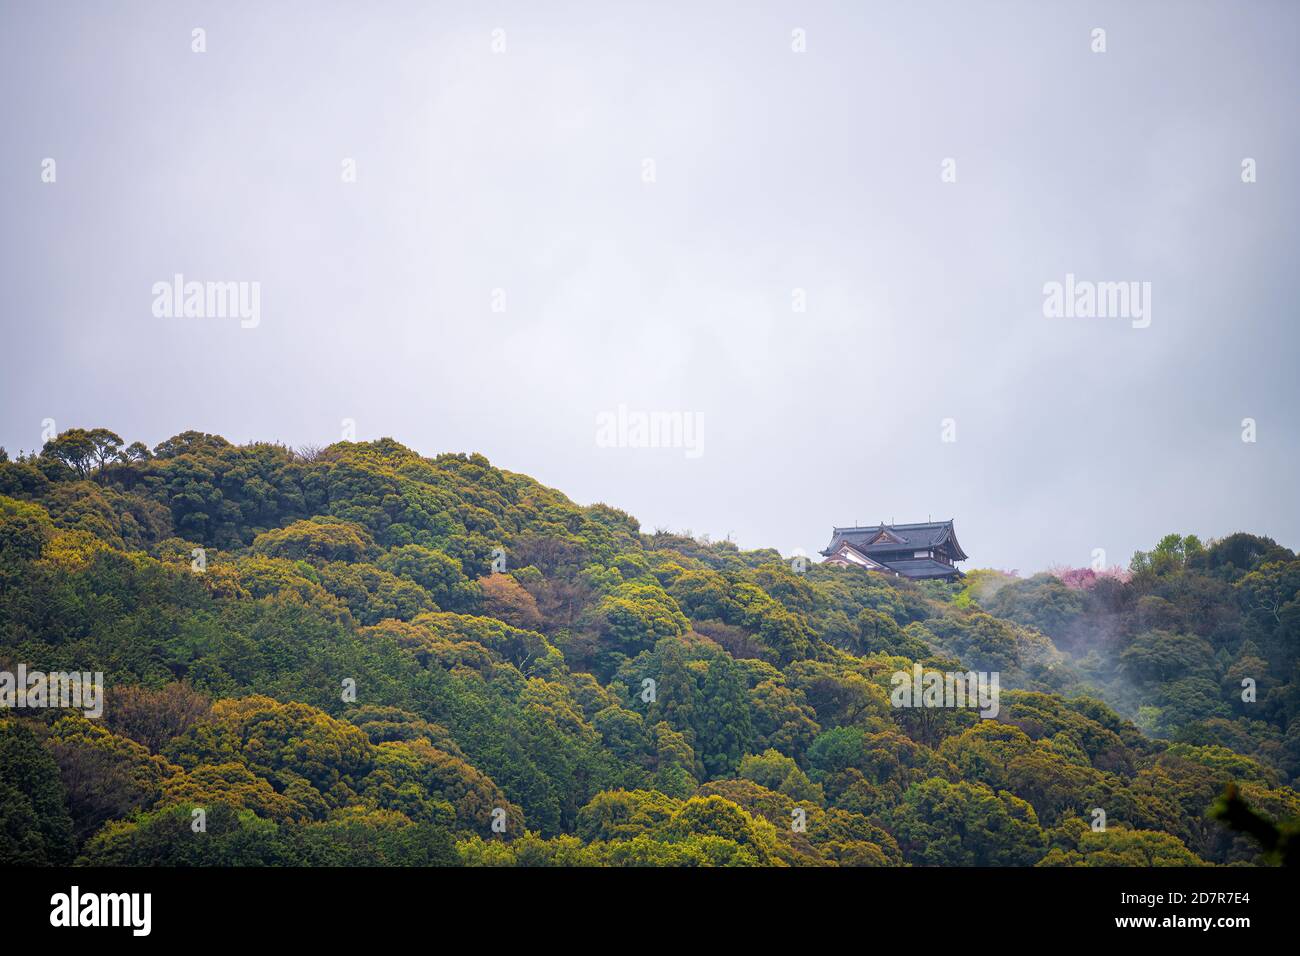 Kyoto, Japan cherry blossom pink and green trees in springtime with temple shrine castle building architecture pagoda mountain view in Sakyo ward Stock Photo